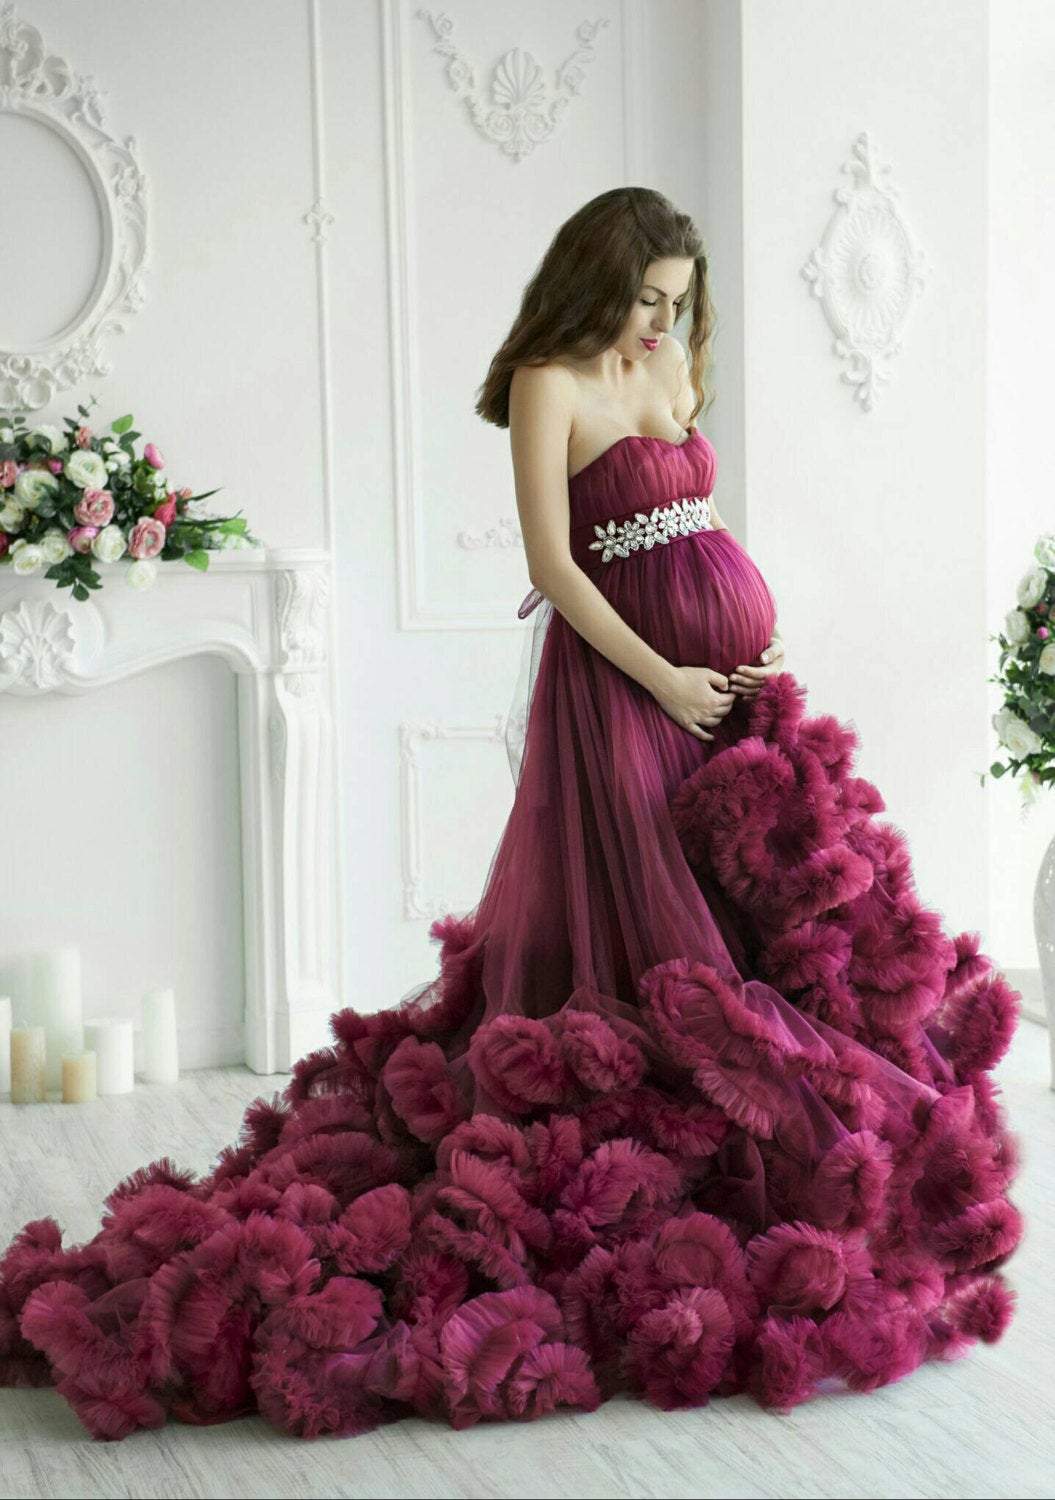 Buy maternity long dresses for pregnancy photoshoot in India @ Limeroad